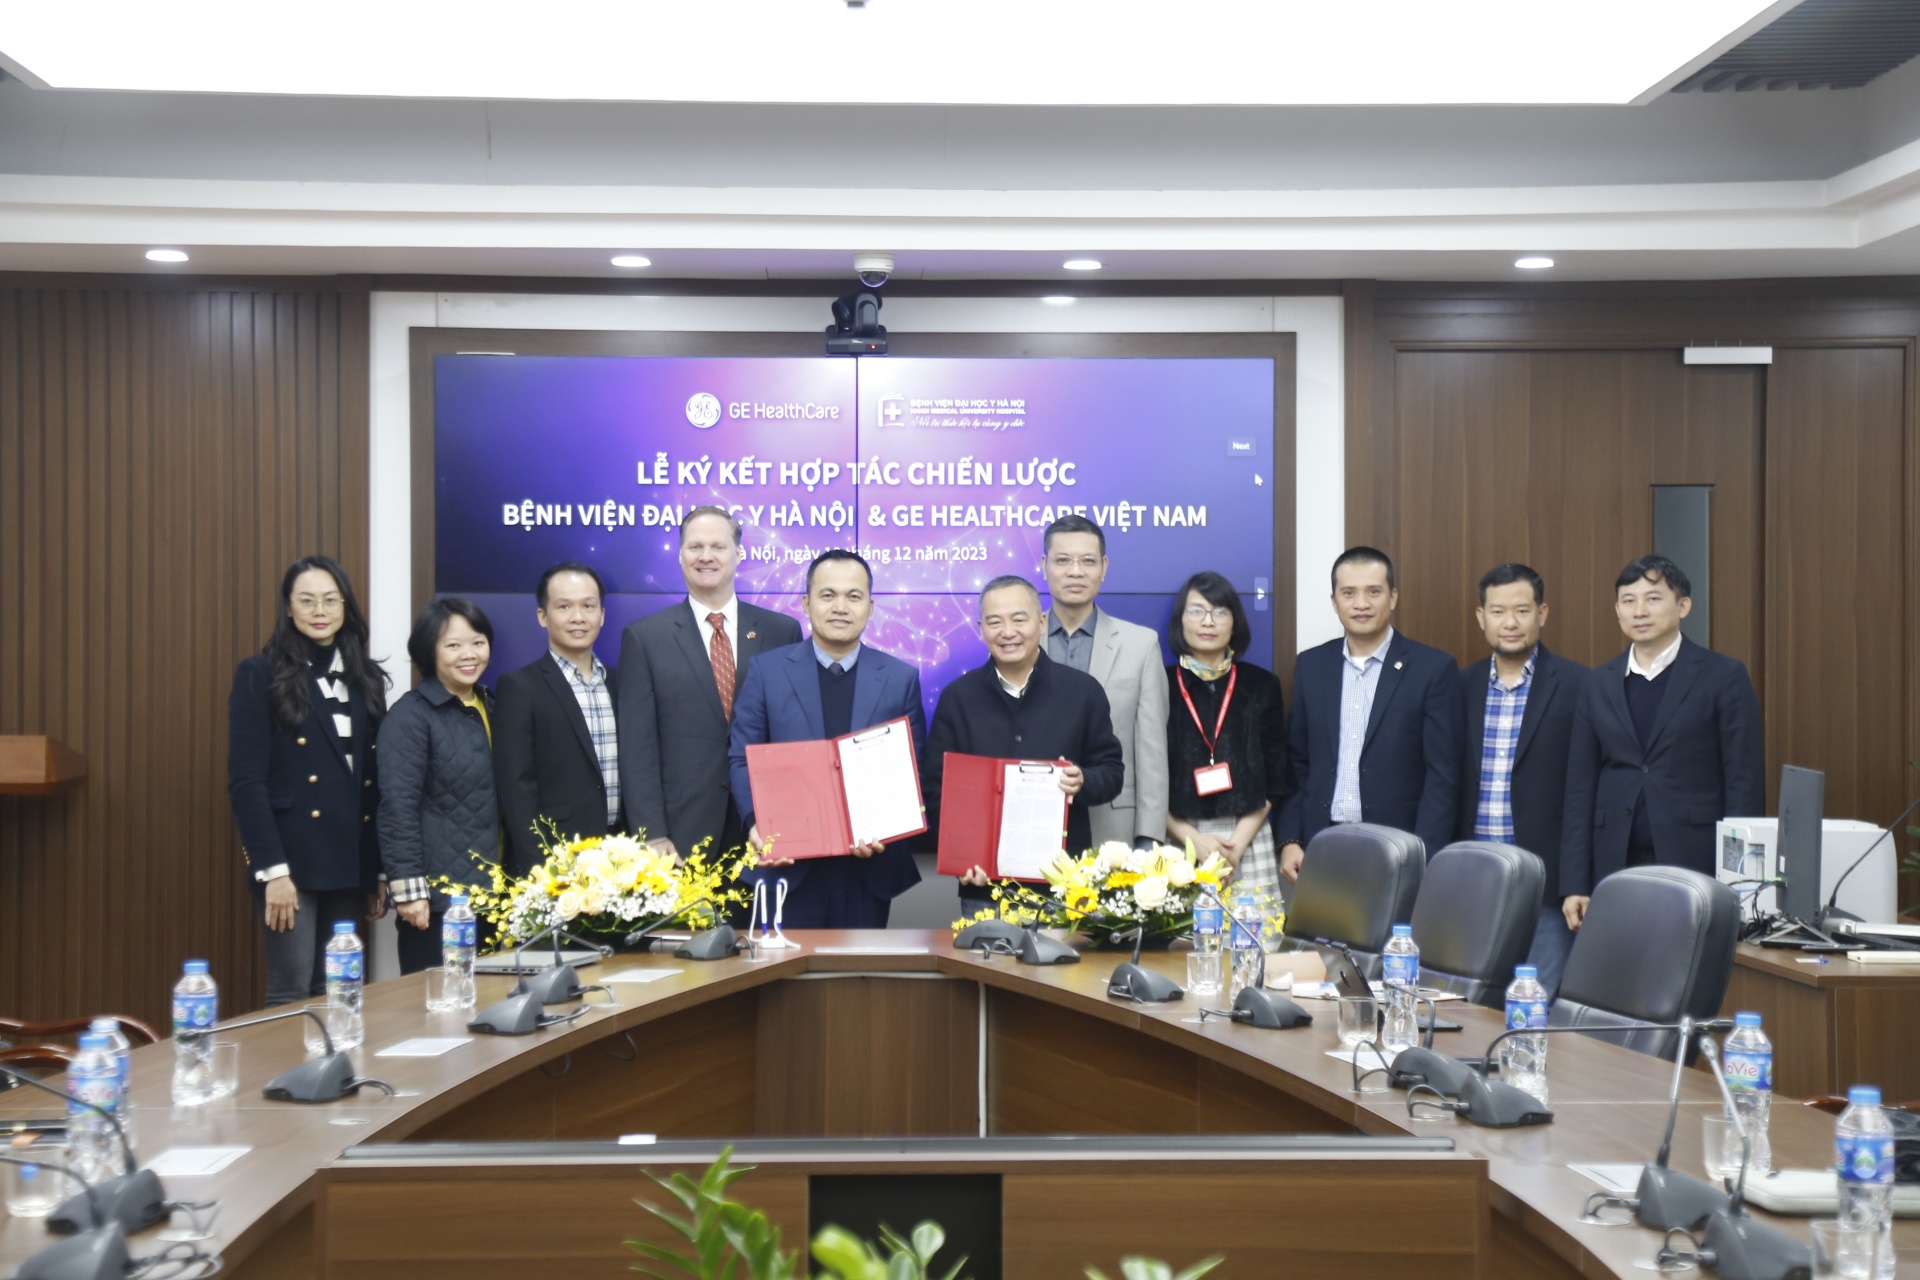 Hanoi Medical University Hospital and GE HealthCare sign MoU